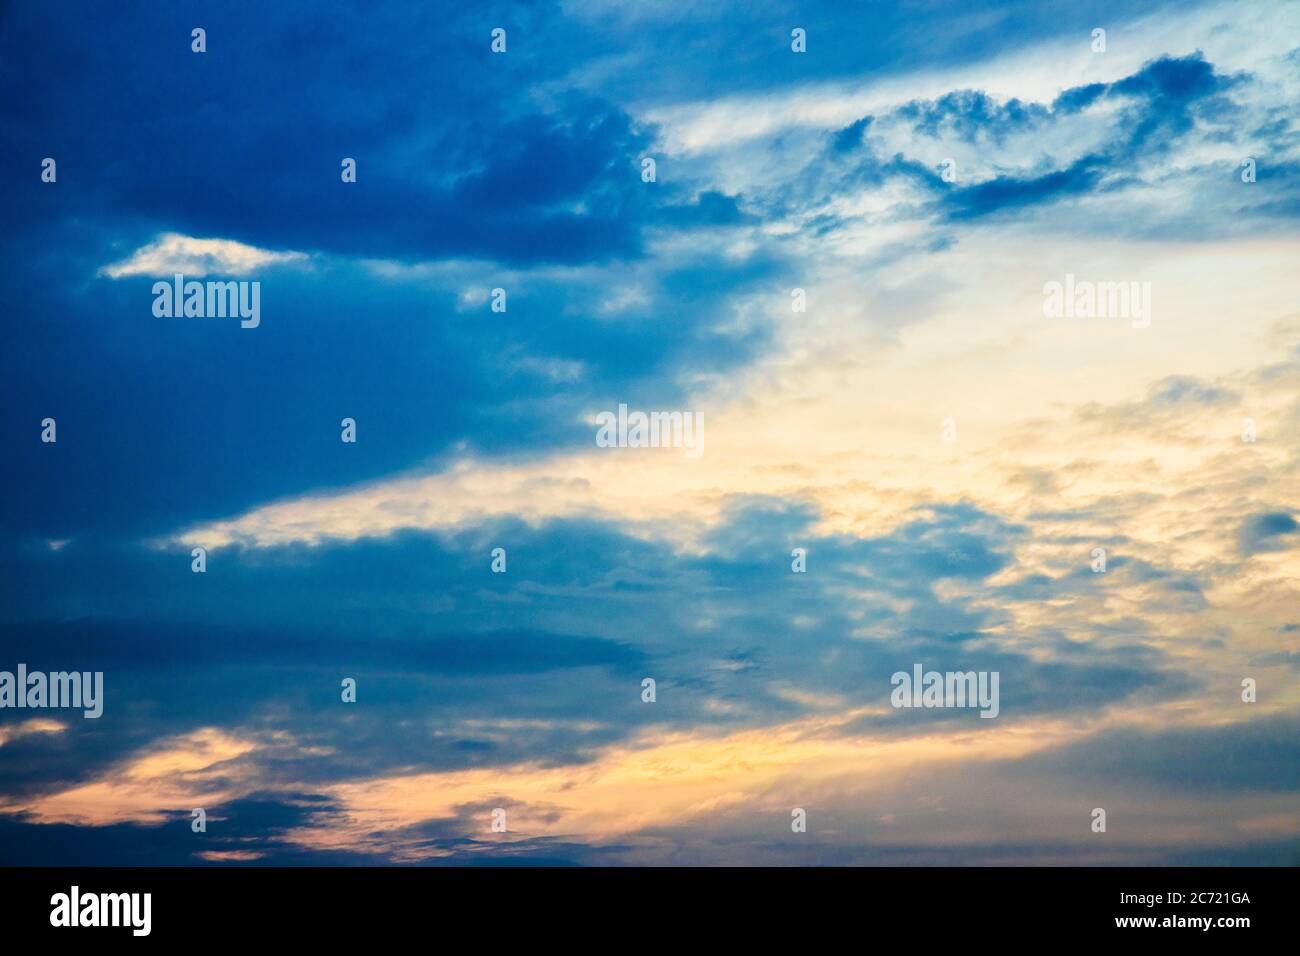 A beautiful sunset sky developing at the end of a summer's day. Stock Photo